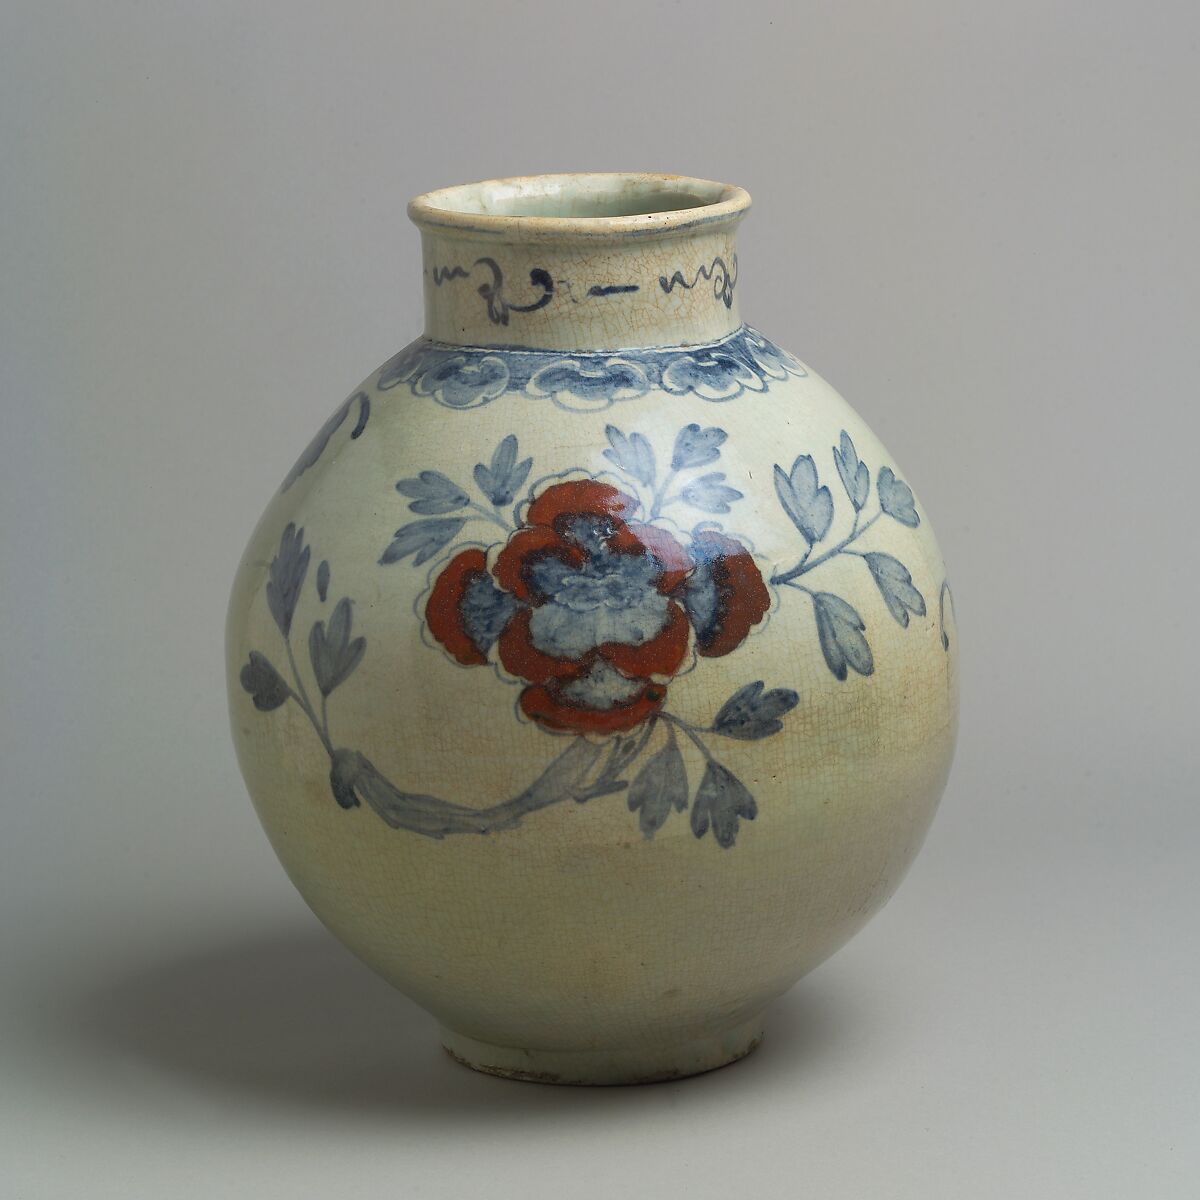 Large jar decorated with peonies, Porcelain with underglaze cobalt-blue and copper-red design, Korea